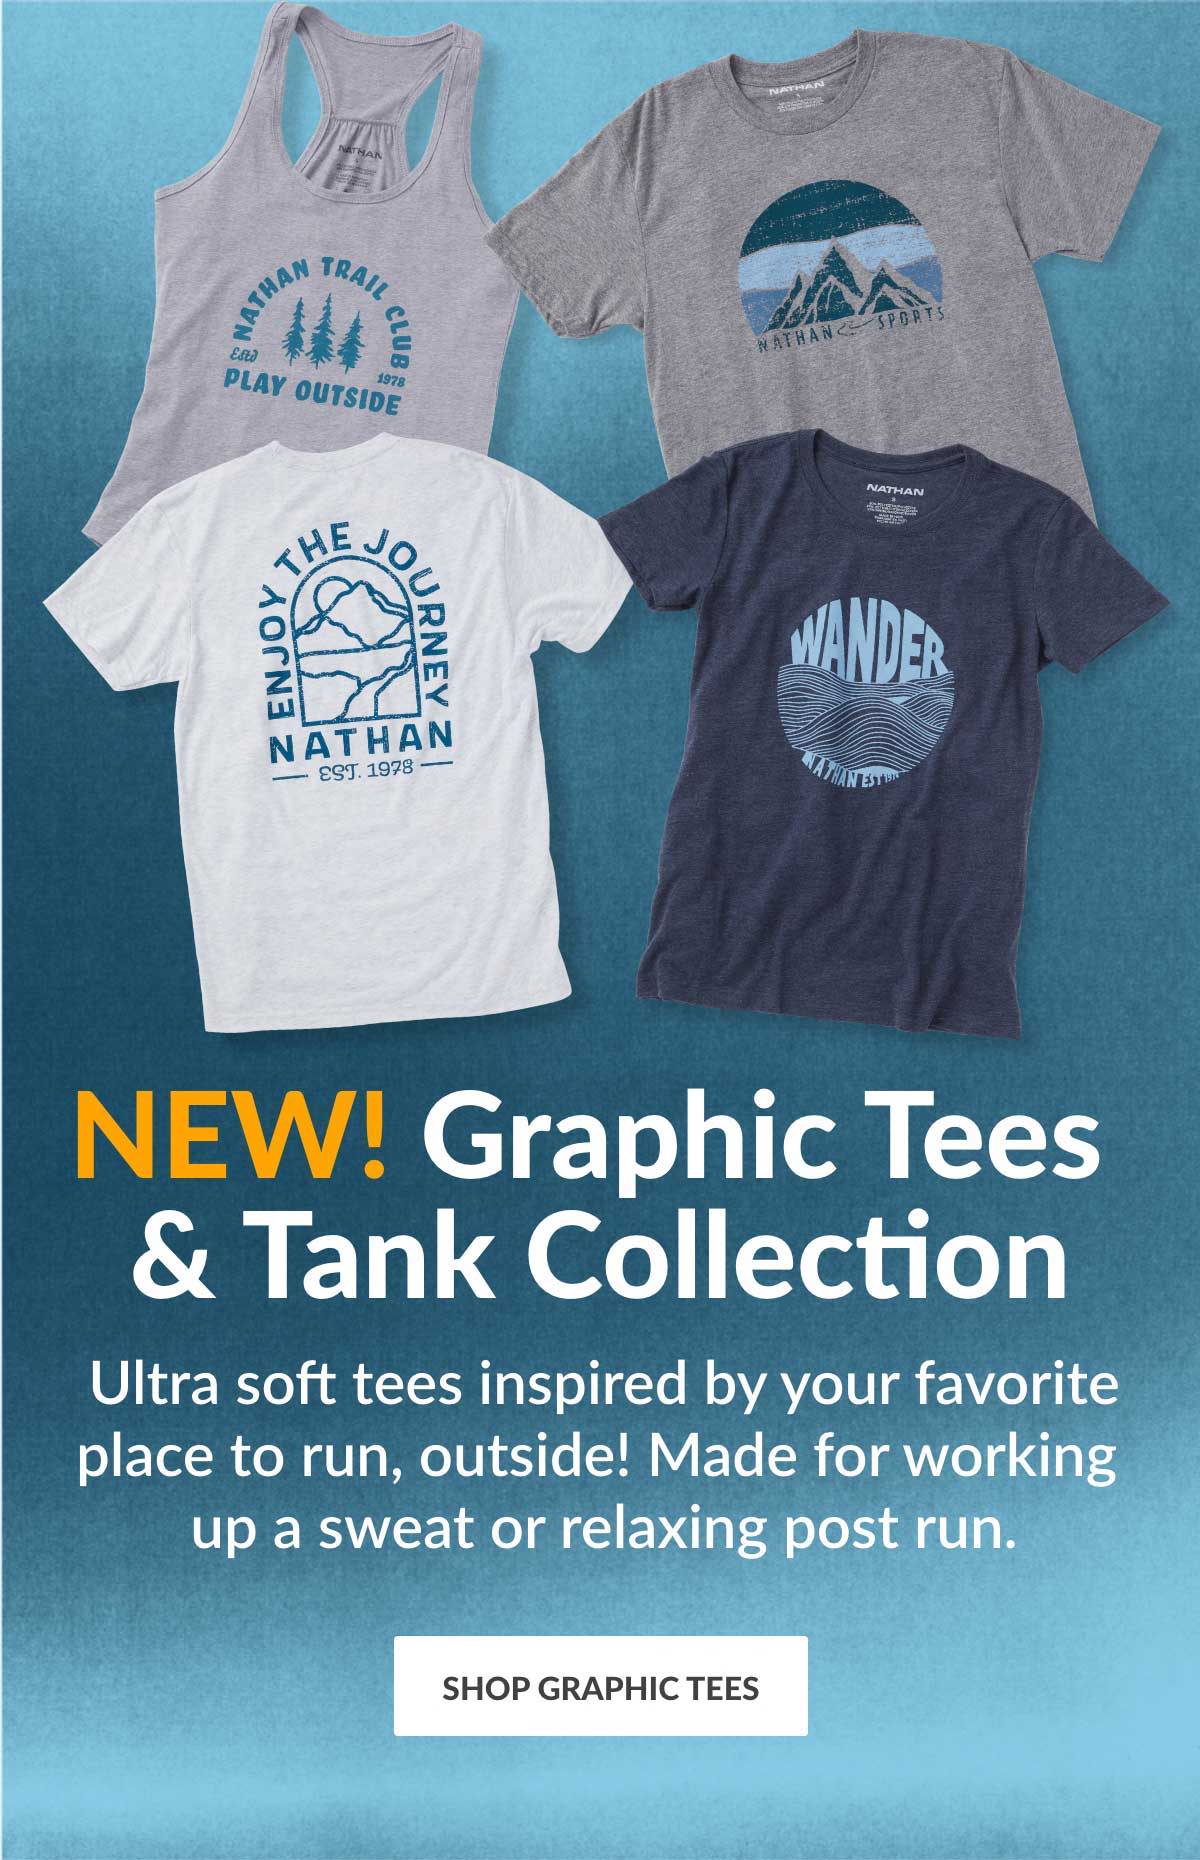 NEW! Graphic Tees & Tank Collection - Ultra soft tees inspired by your favorite place to run, outside! Made for working up a sweat or relaxing post run - SHOP GRAPHIC TEES